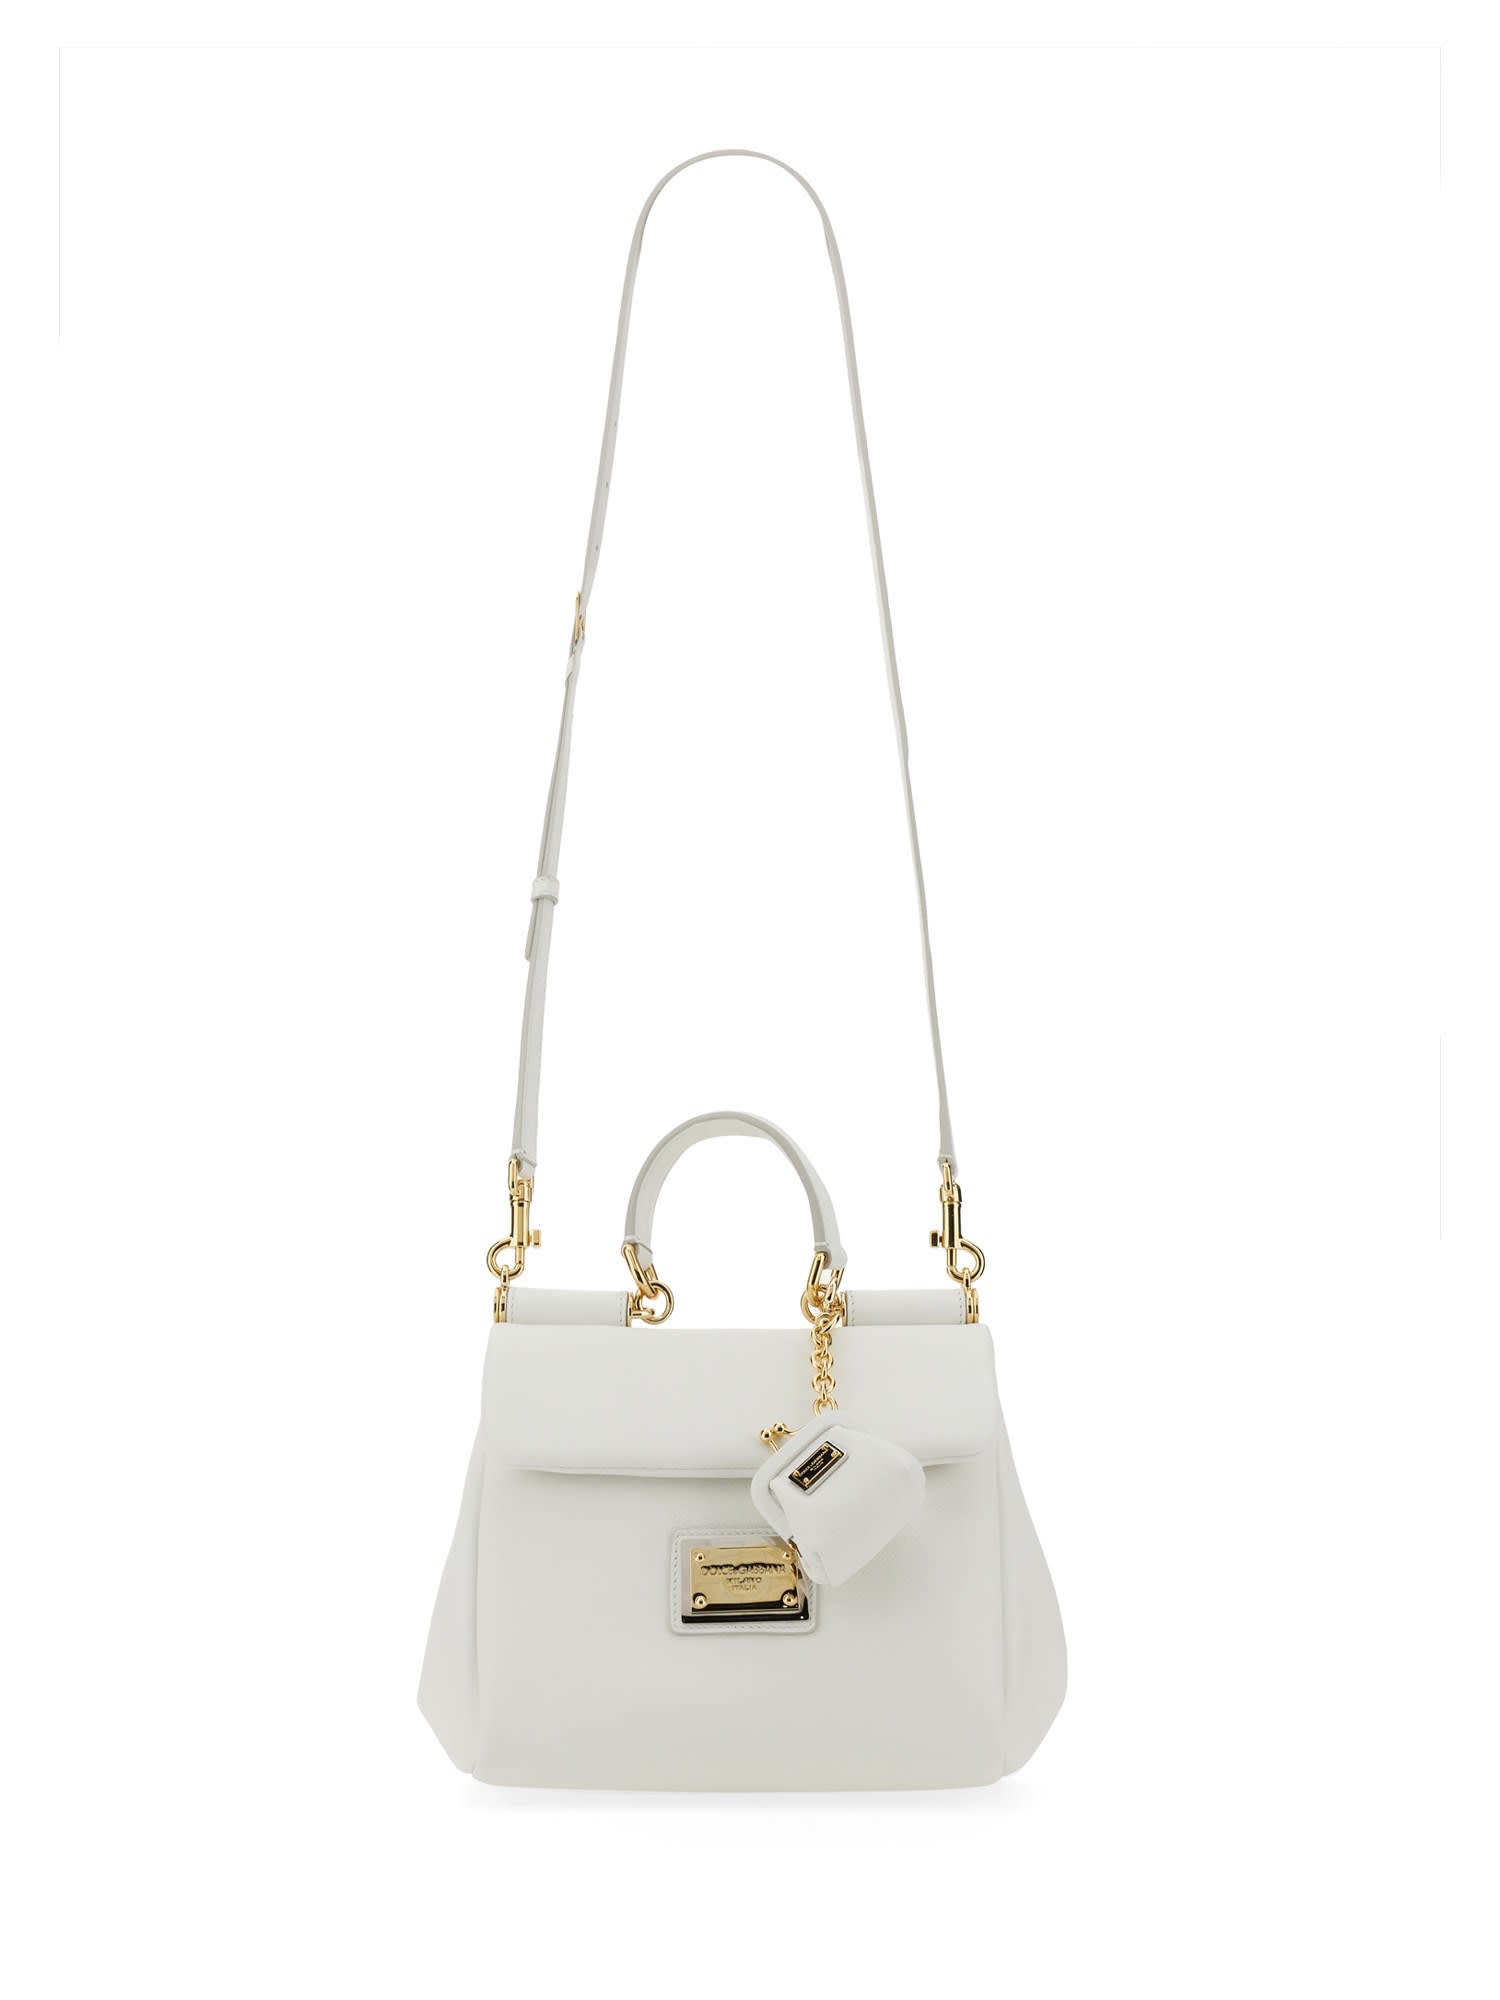 Dolce & Gabbana Sicily Soft Small Leather Tote Bag in White